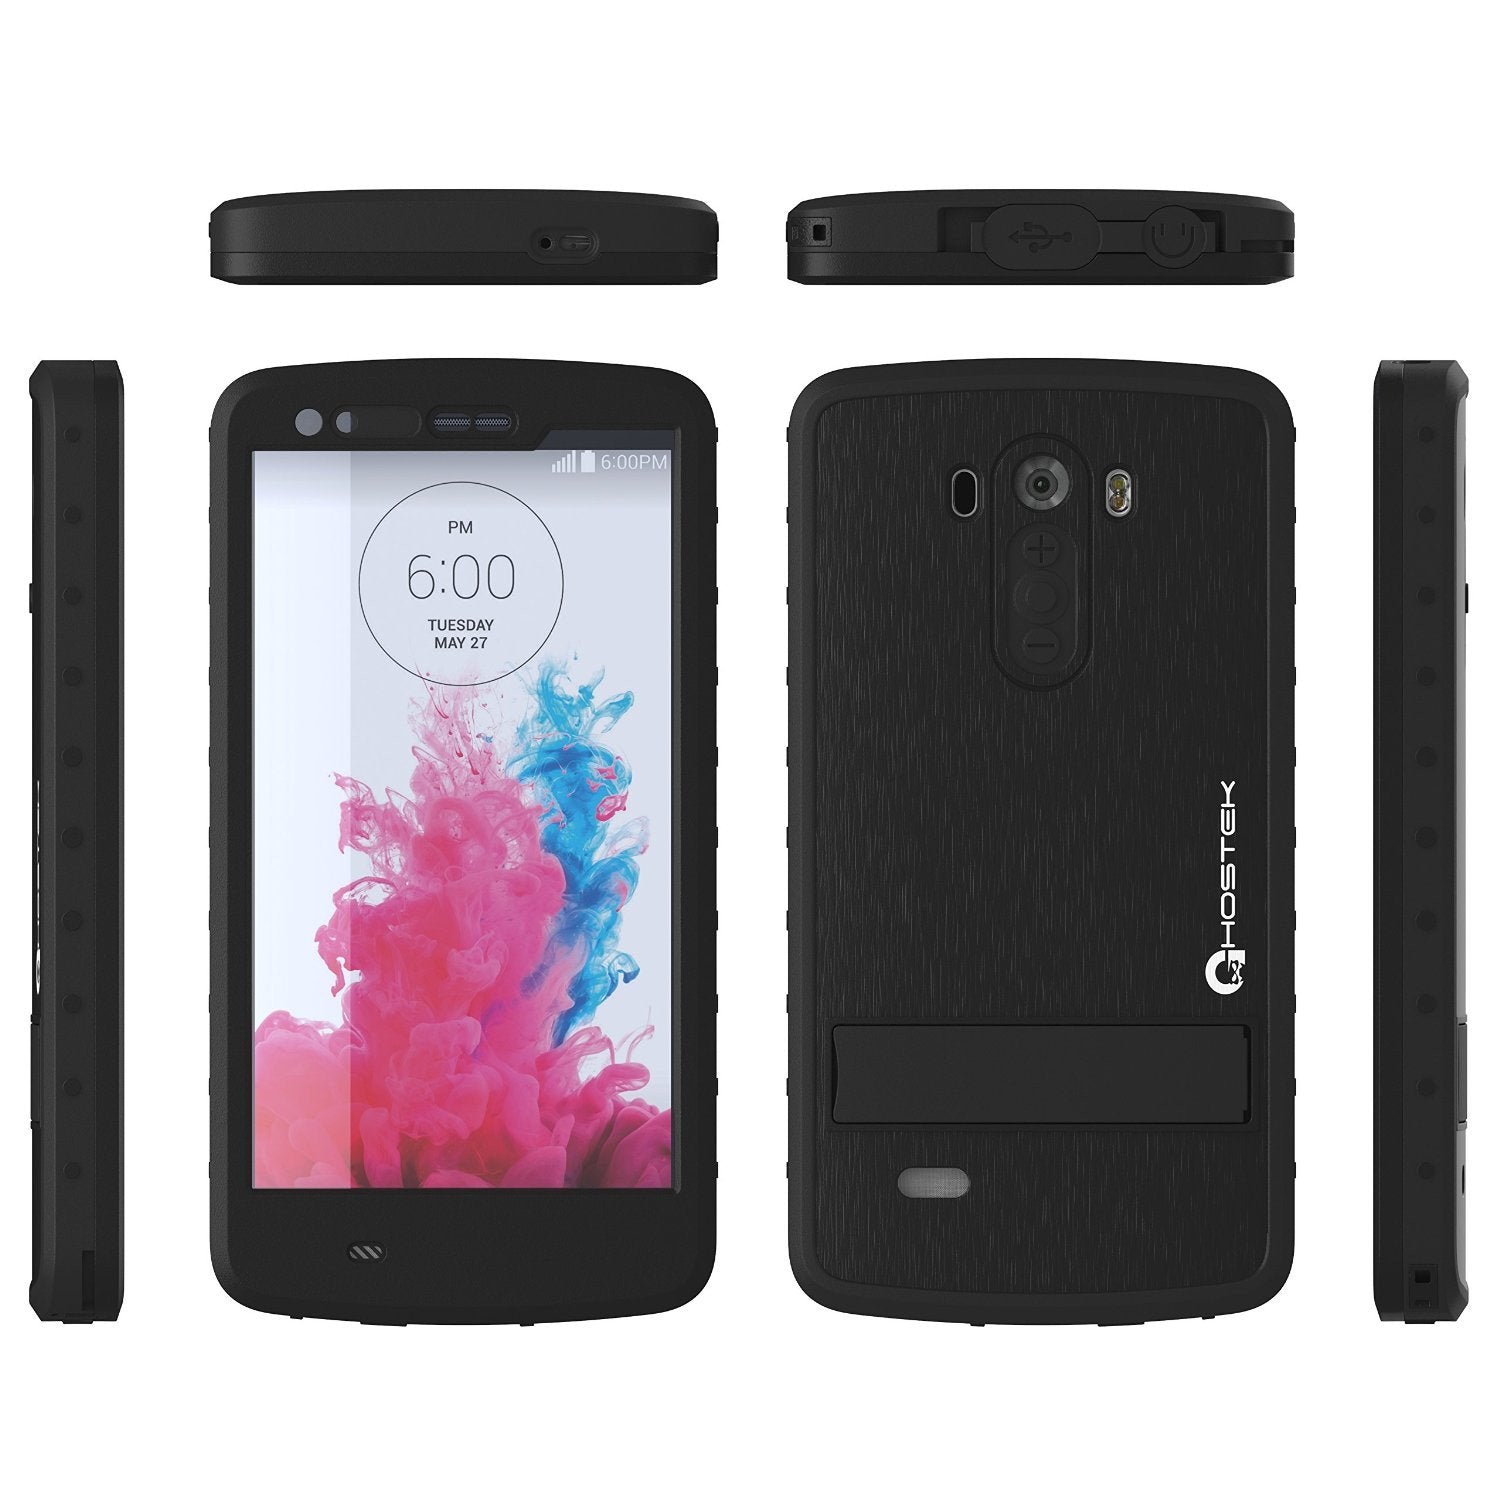 LG G3 Waterproof Case, Ghostek Atomic Black W/ Attached Screen Protector Fitted for LG G3